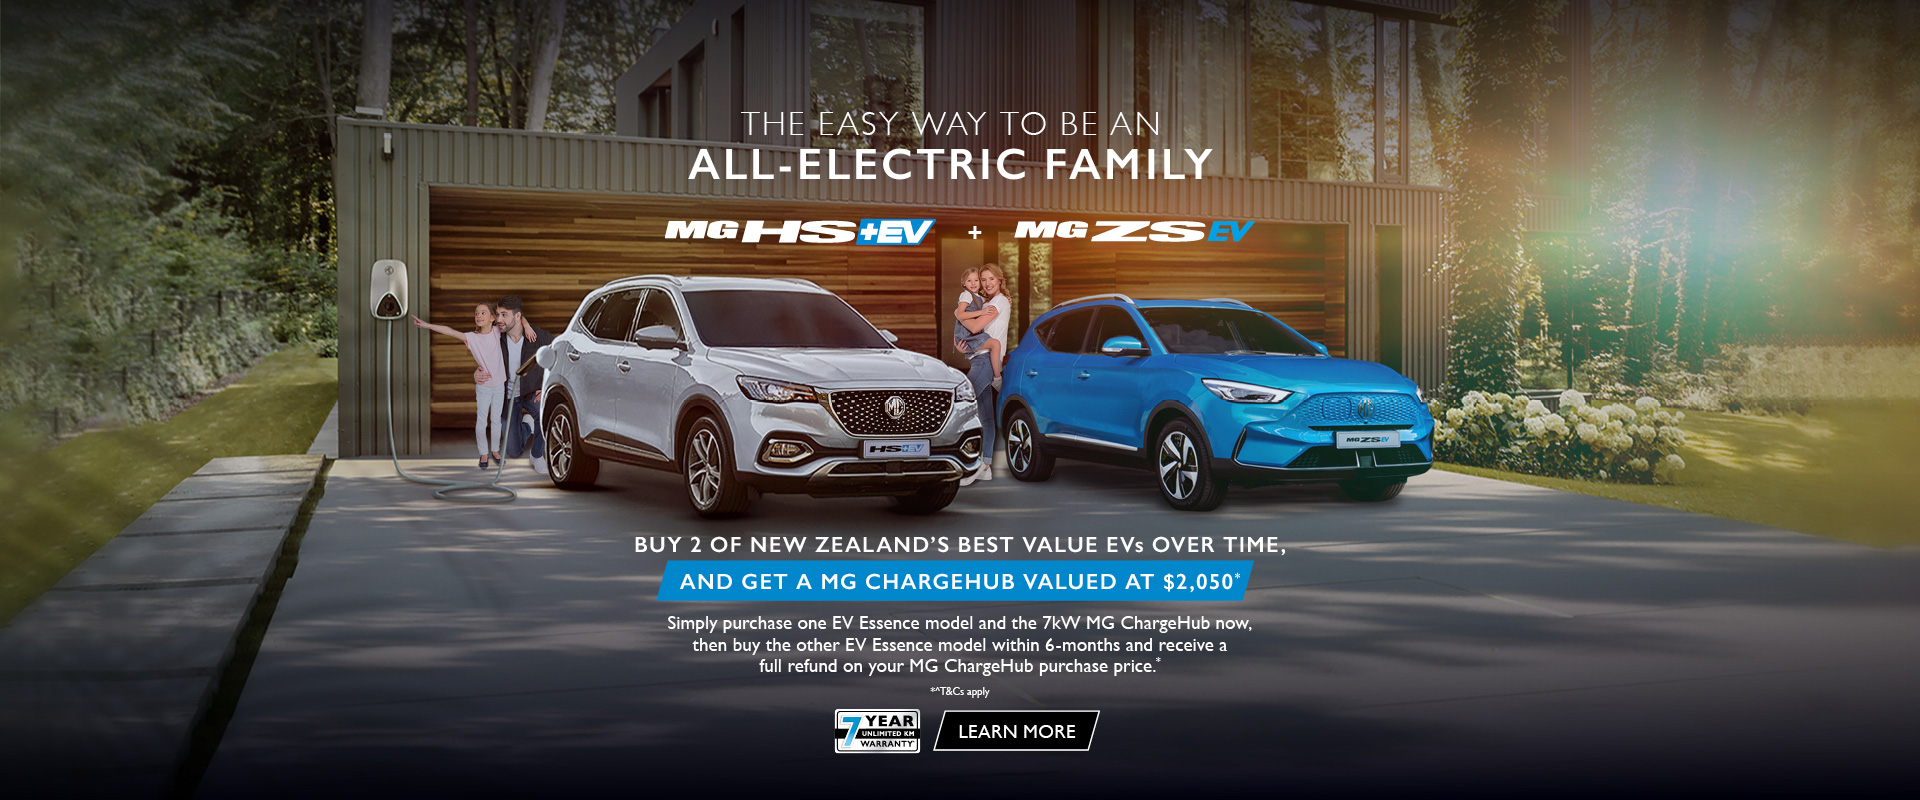 The easy way to be an all electric family. 